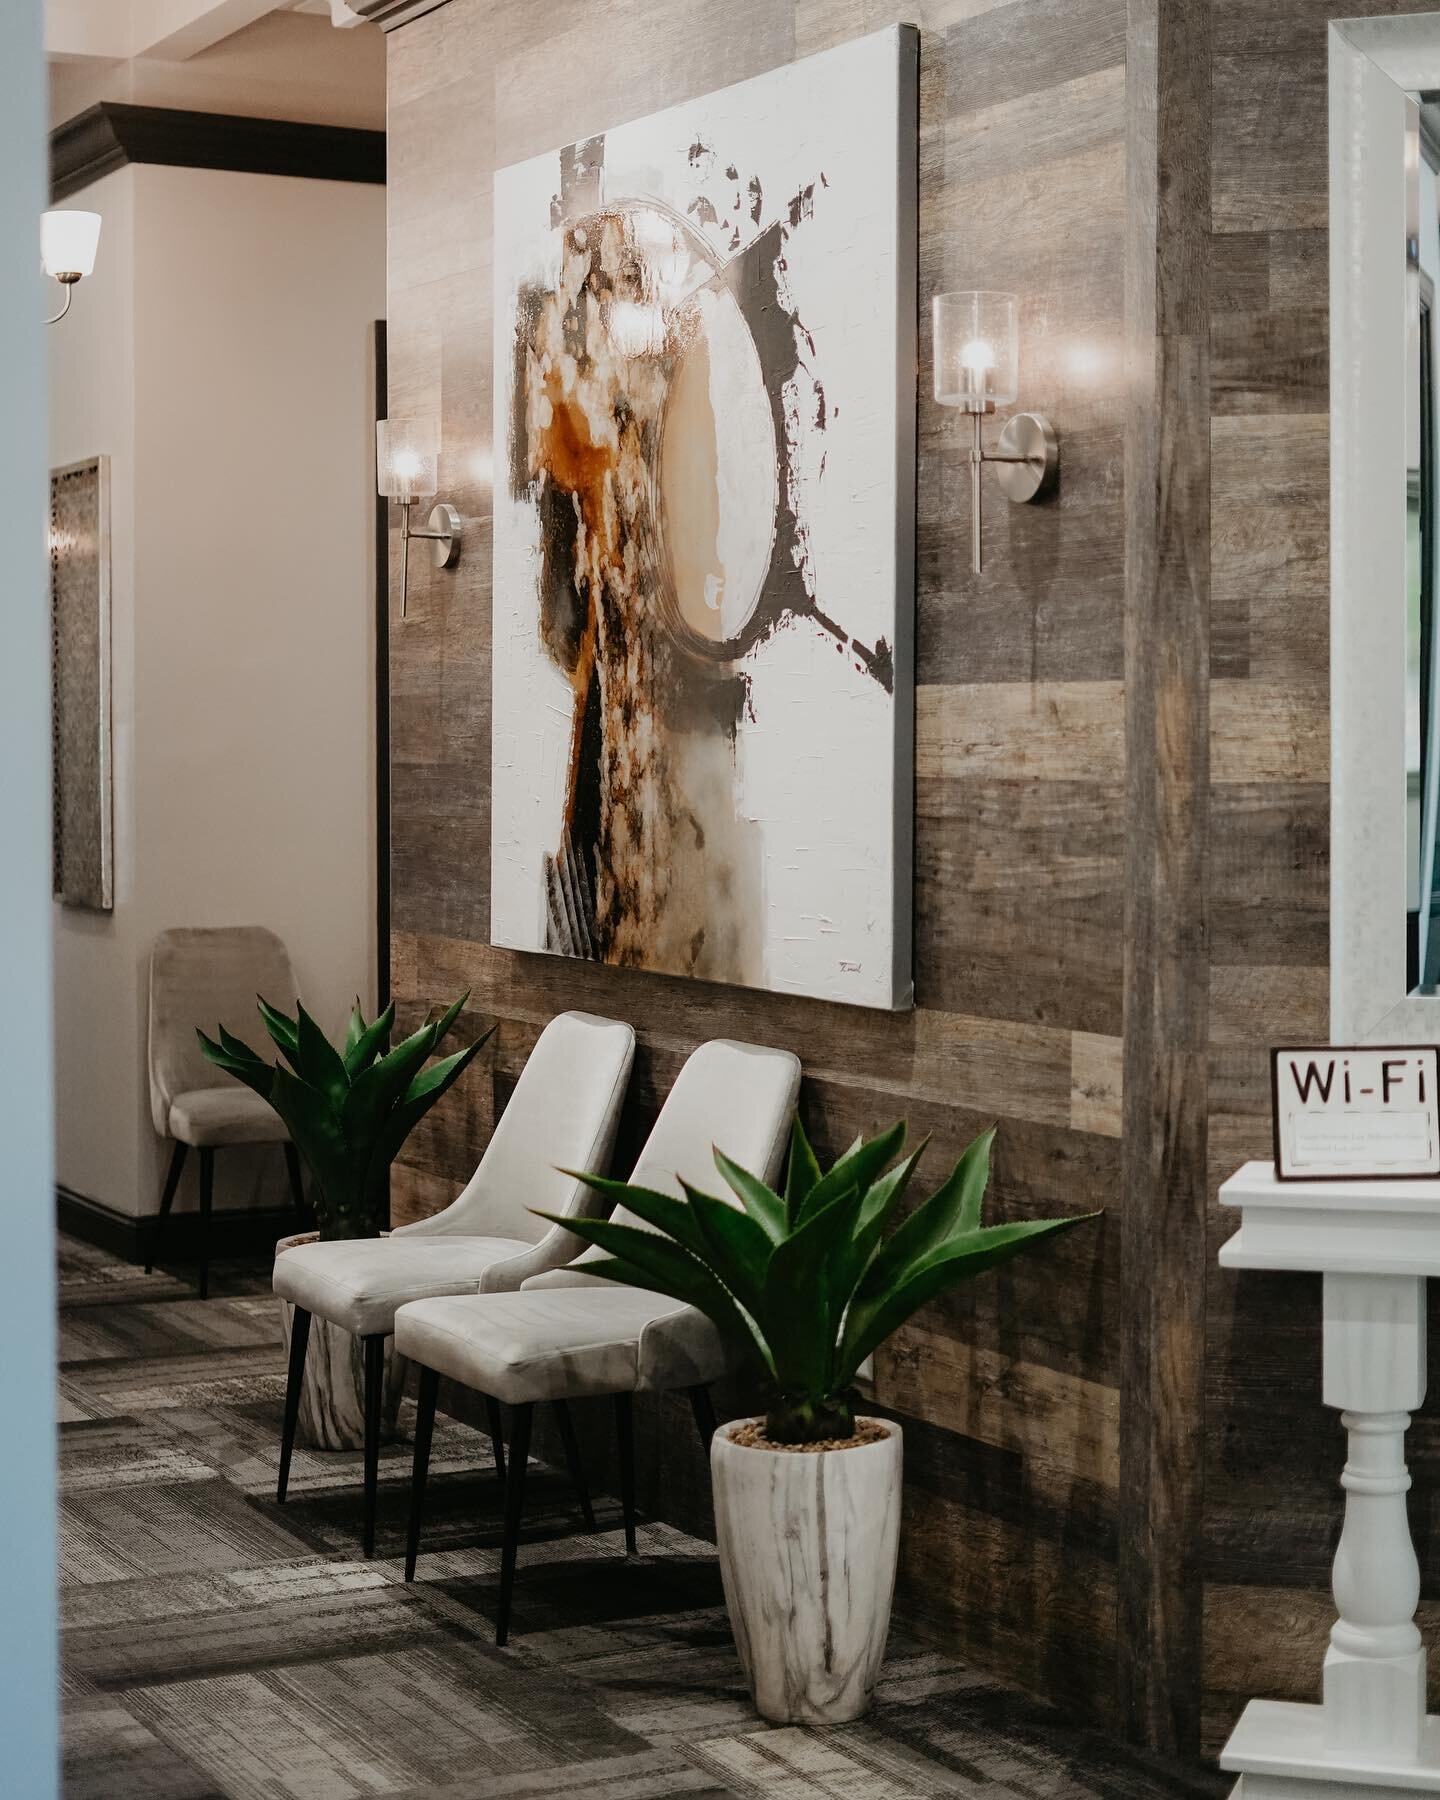 Our waiting areas are beautifully decorated and cozy for your clients to wait comfortably for their service.
&bull;
&bull;
&bull;
&bull;
&bull;
&bull;
&bull;
&bull;
#luxsalonsuites #hairstyles #salonprofessional #cosmetology #blondes #beachwaves #dim